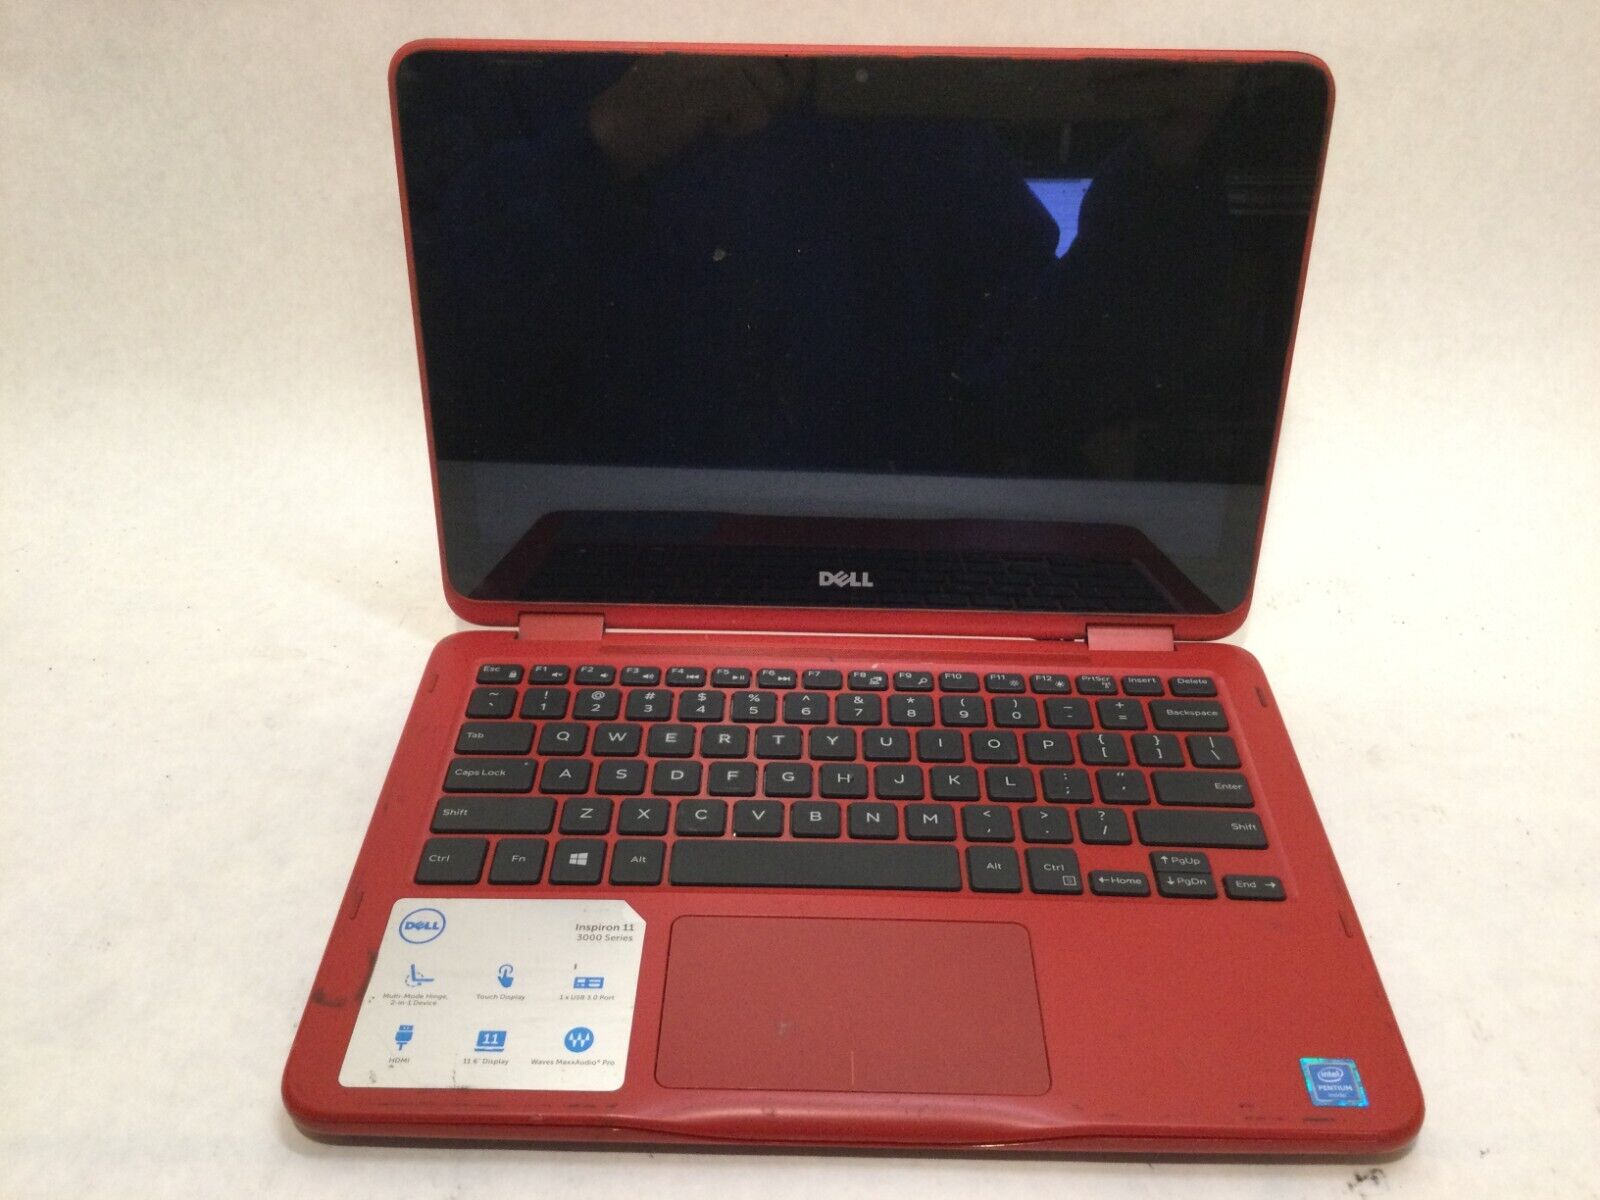 Dell Inspiron 11 3168 11.6” / Intel Pentium /(DOES NOT POWER ON/MISSING PARTS)MR